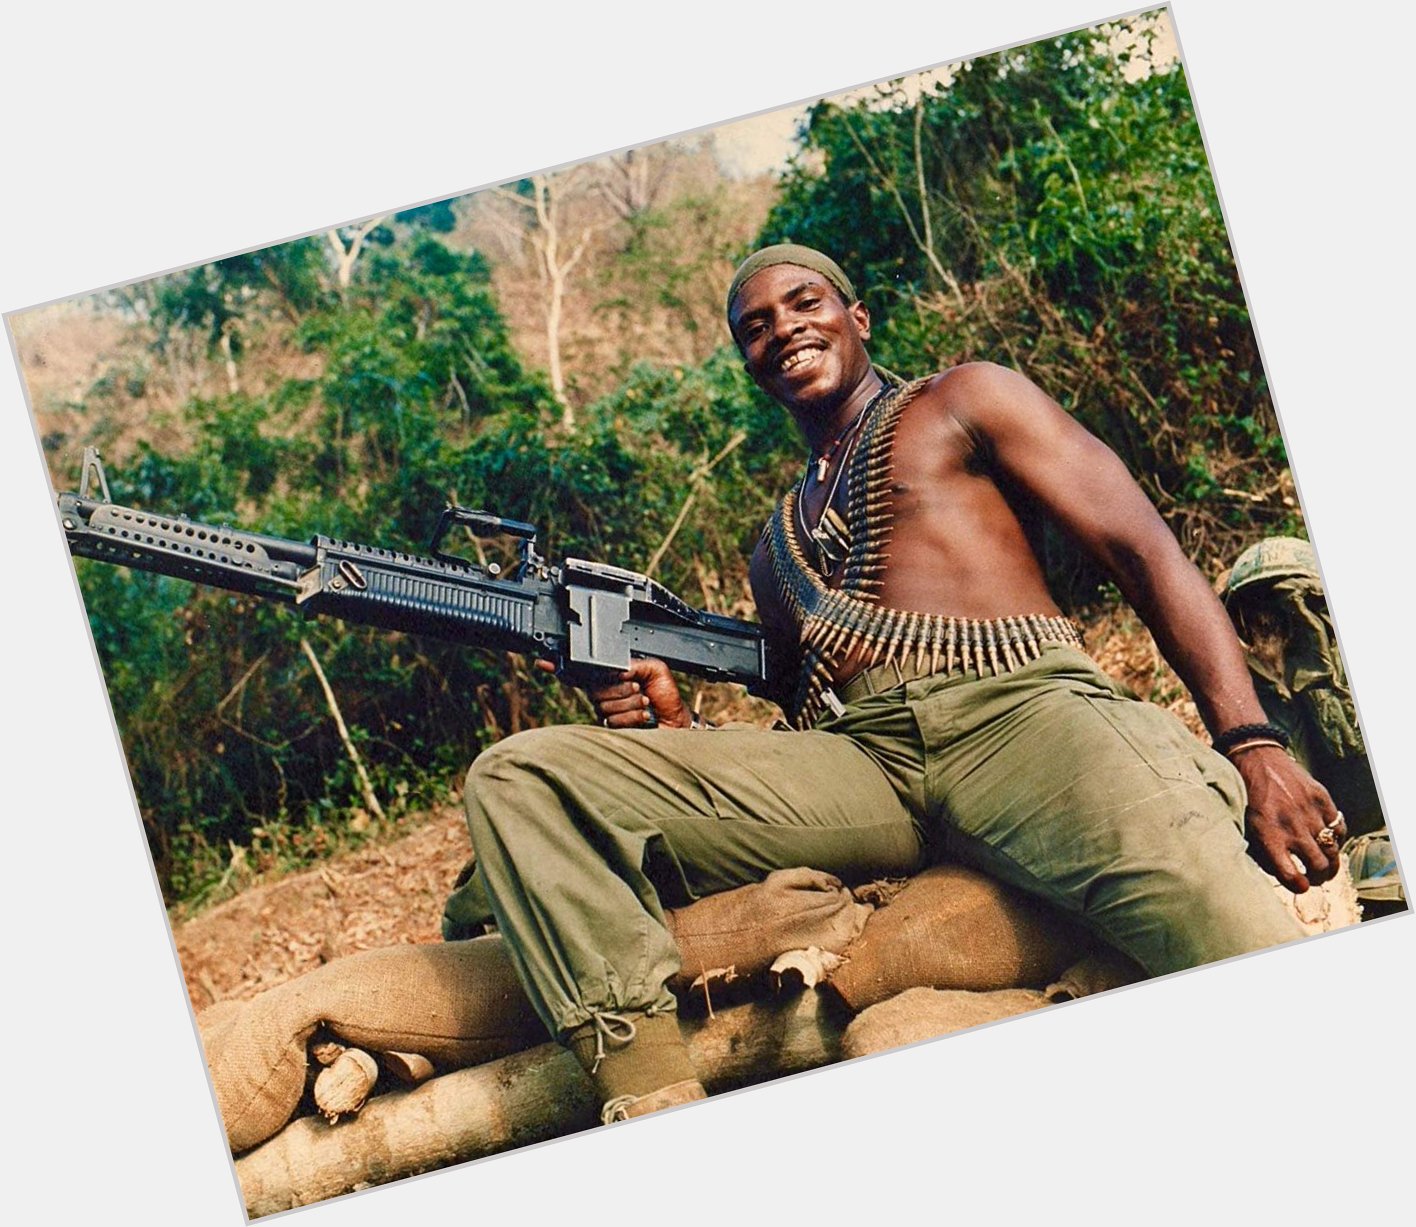 Happy Birthday to Keith David, here in PLATOON! 